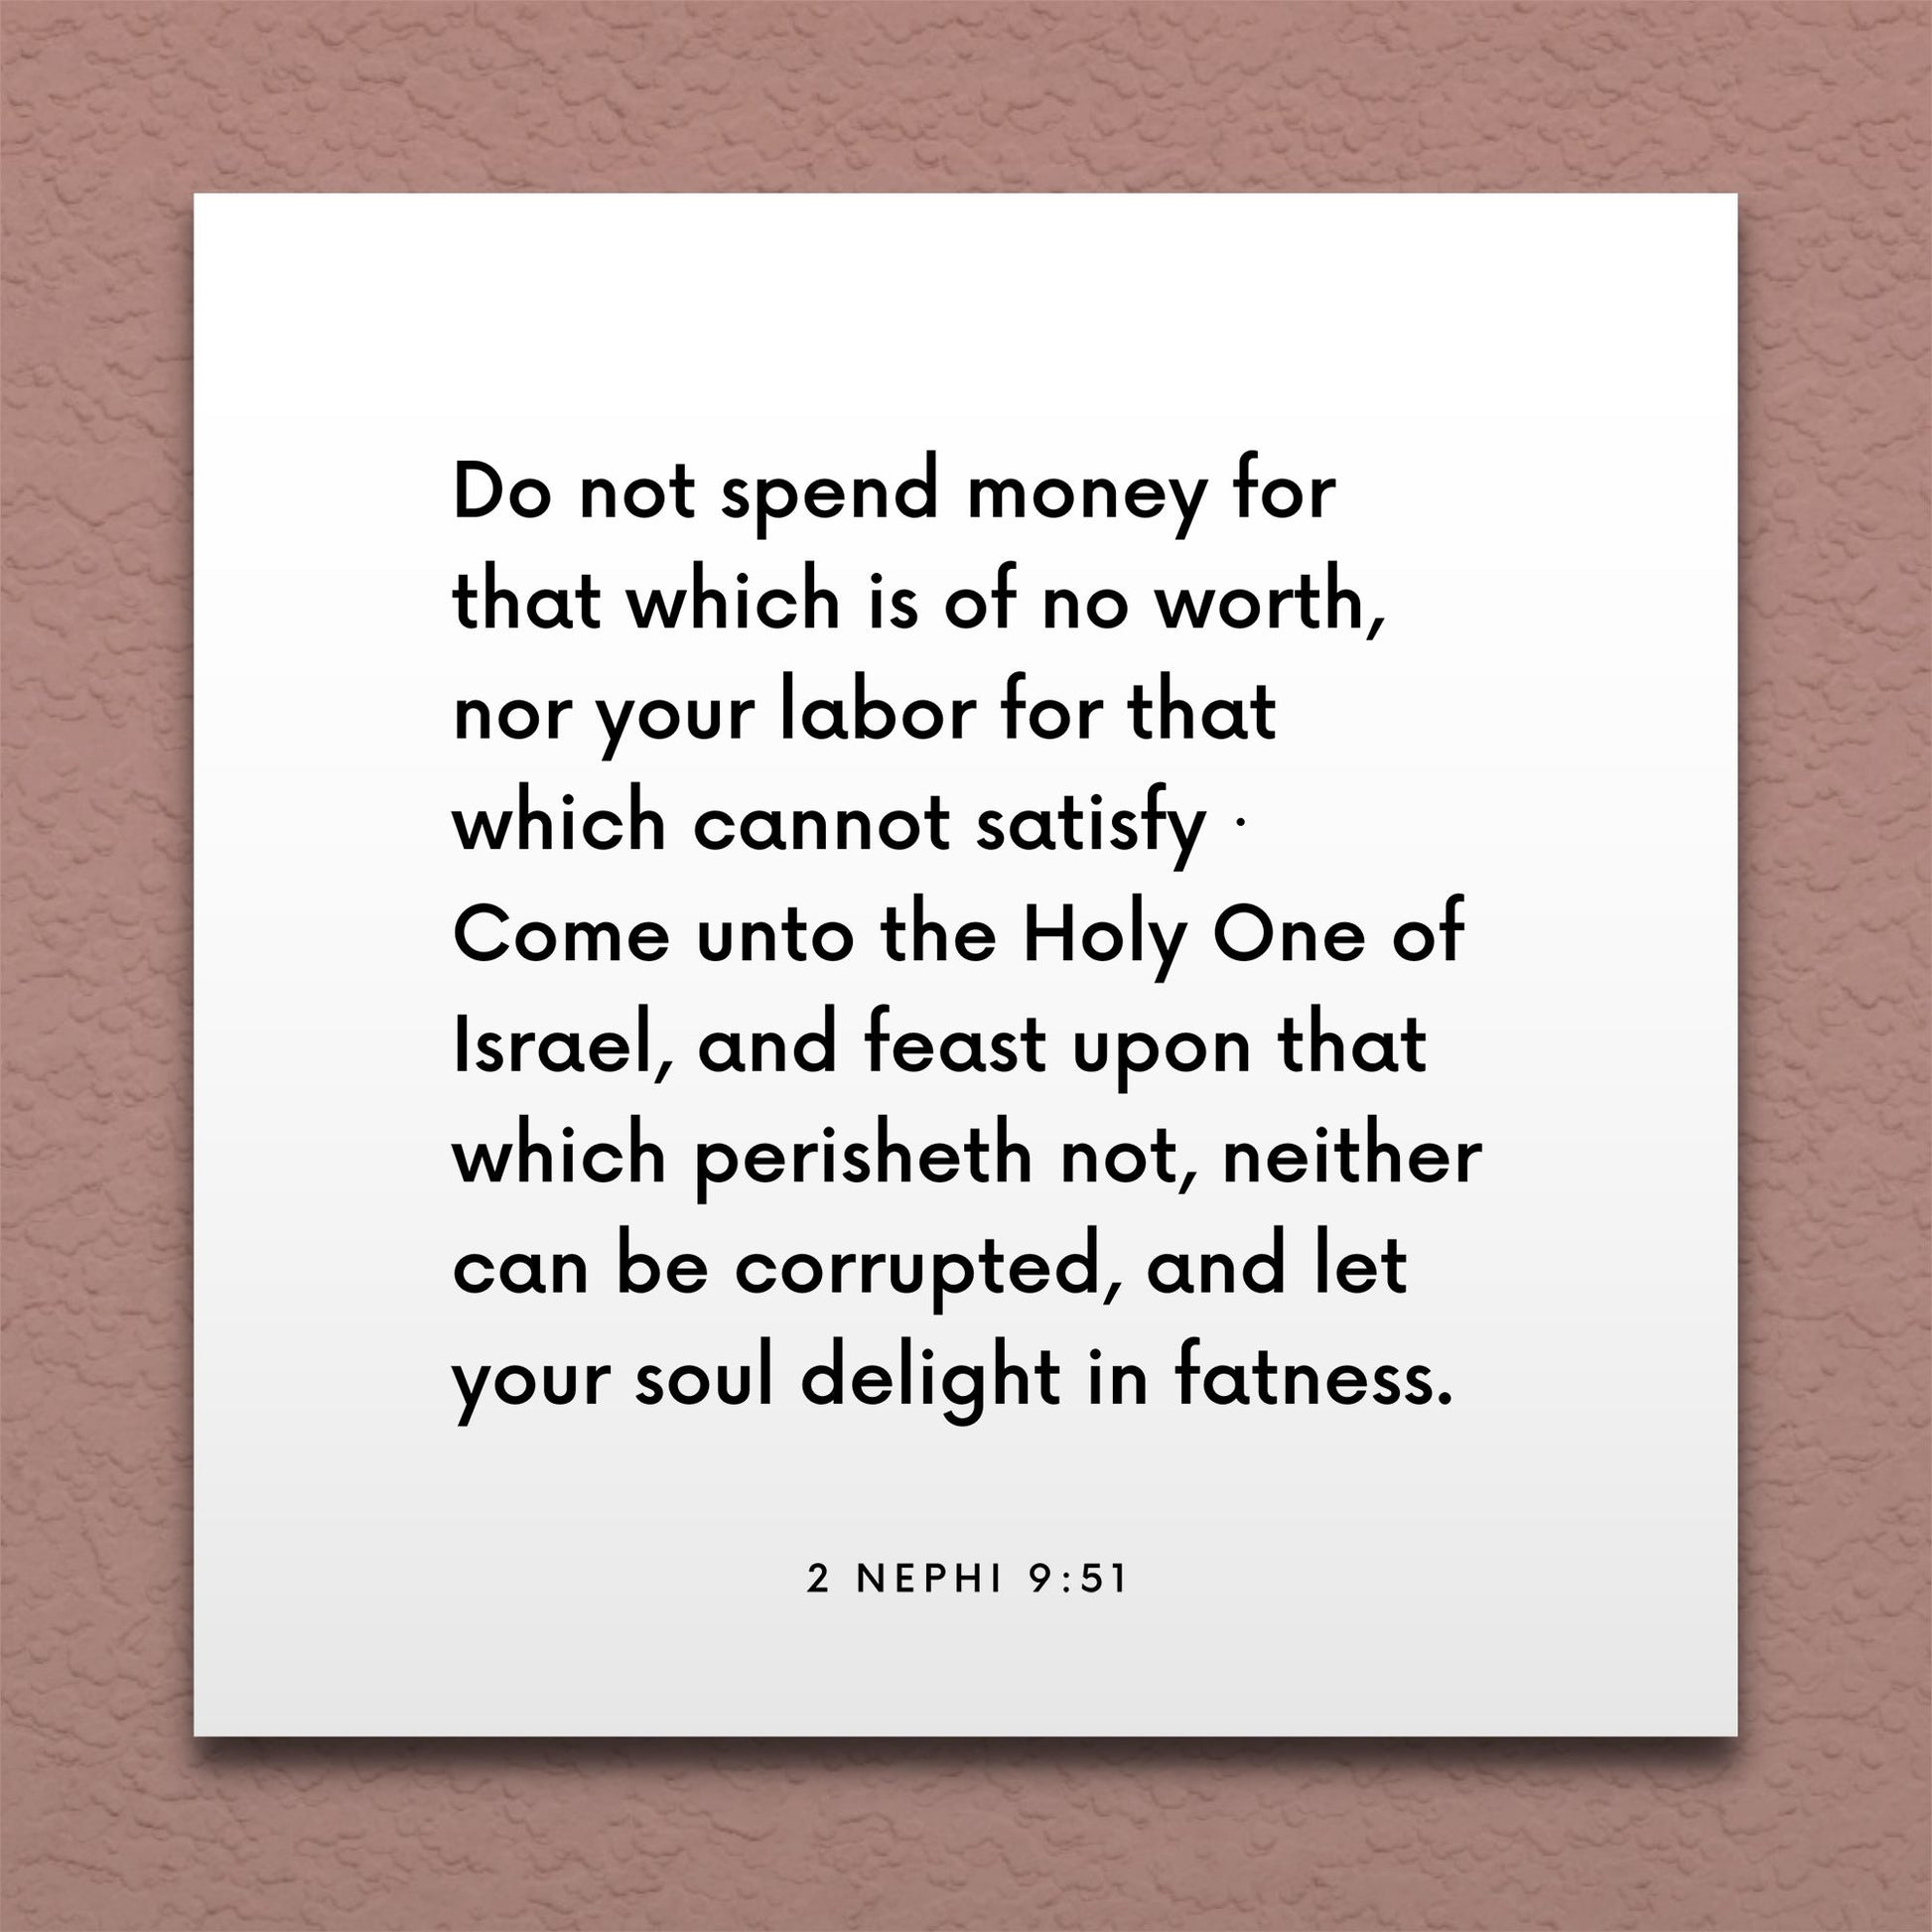 Wall-mounted scripture tile for 2 Nephi 9:51 - "Do not spend money for that which is of no worth"